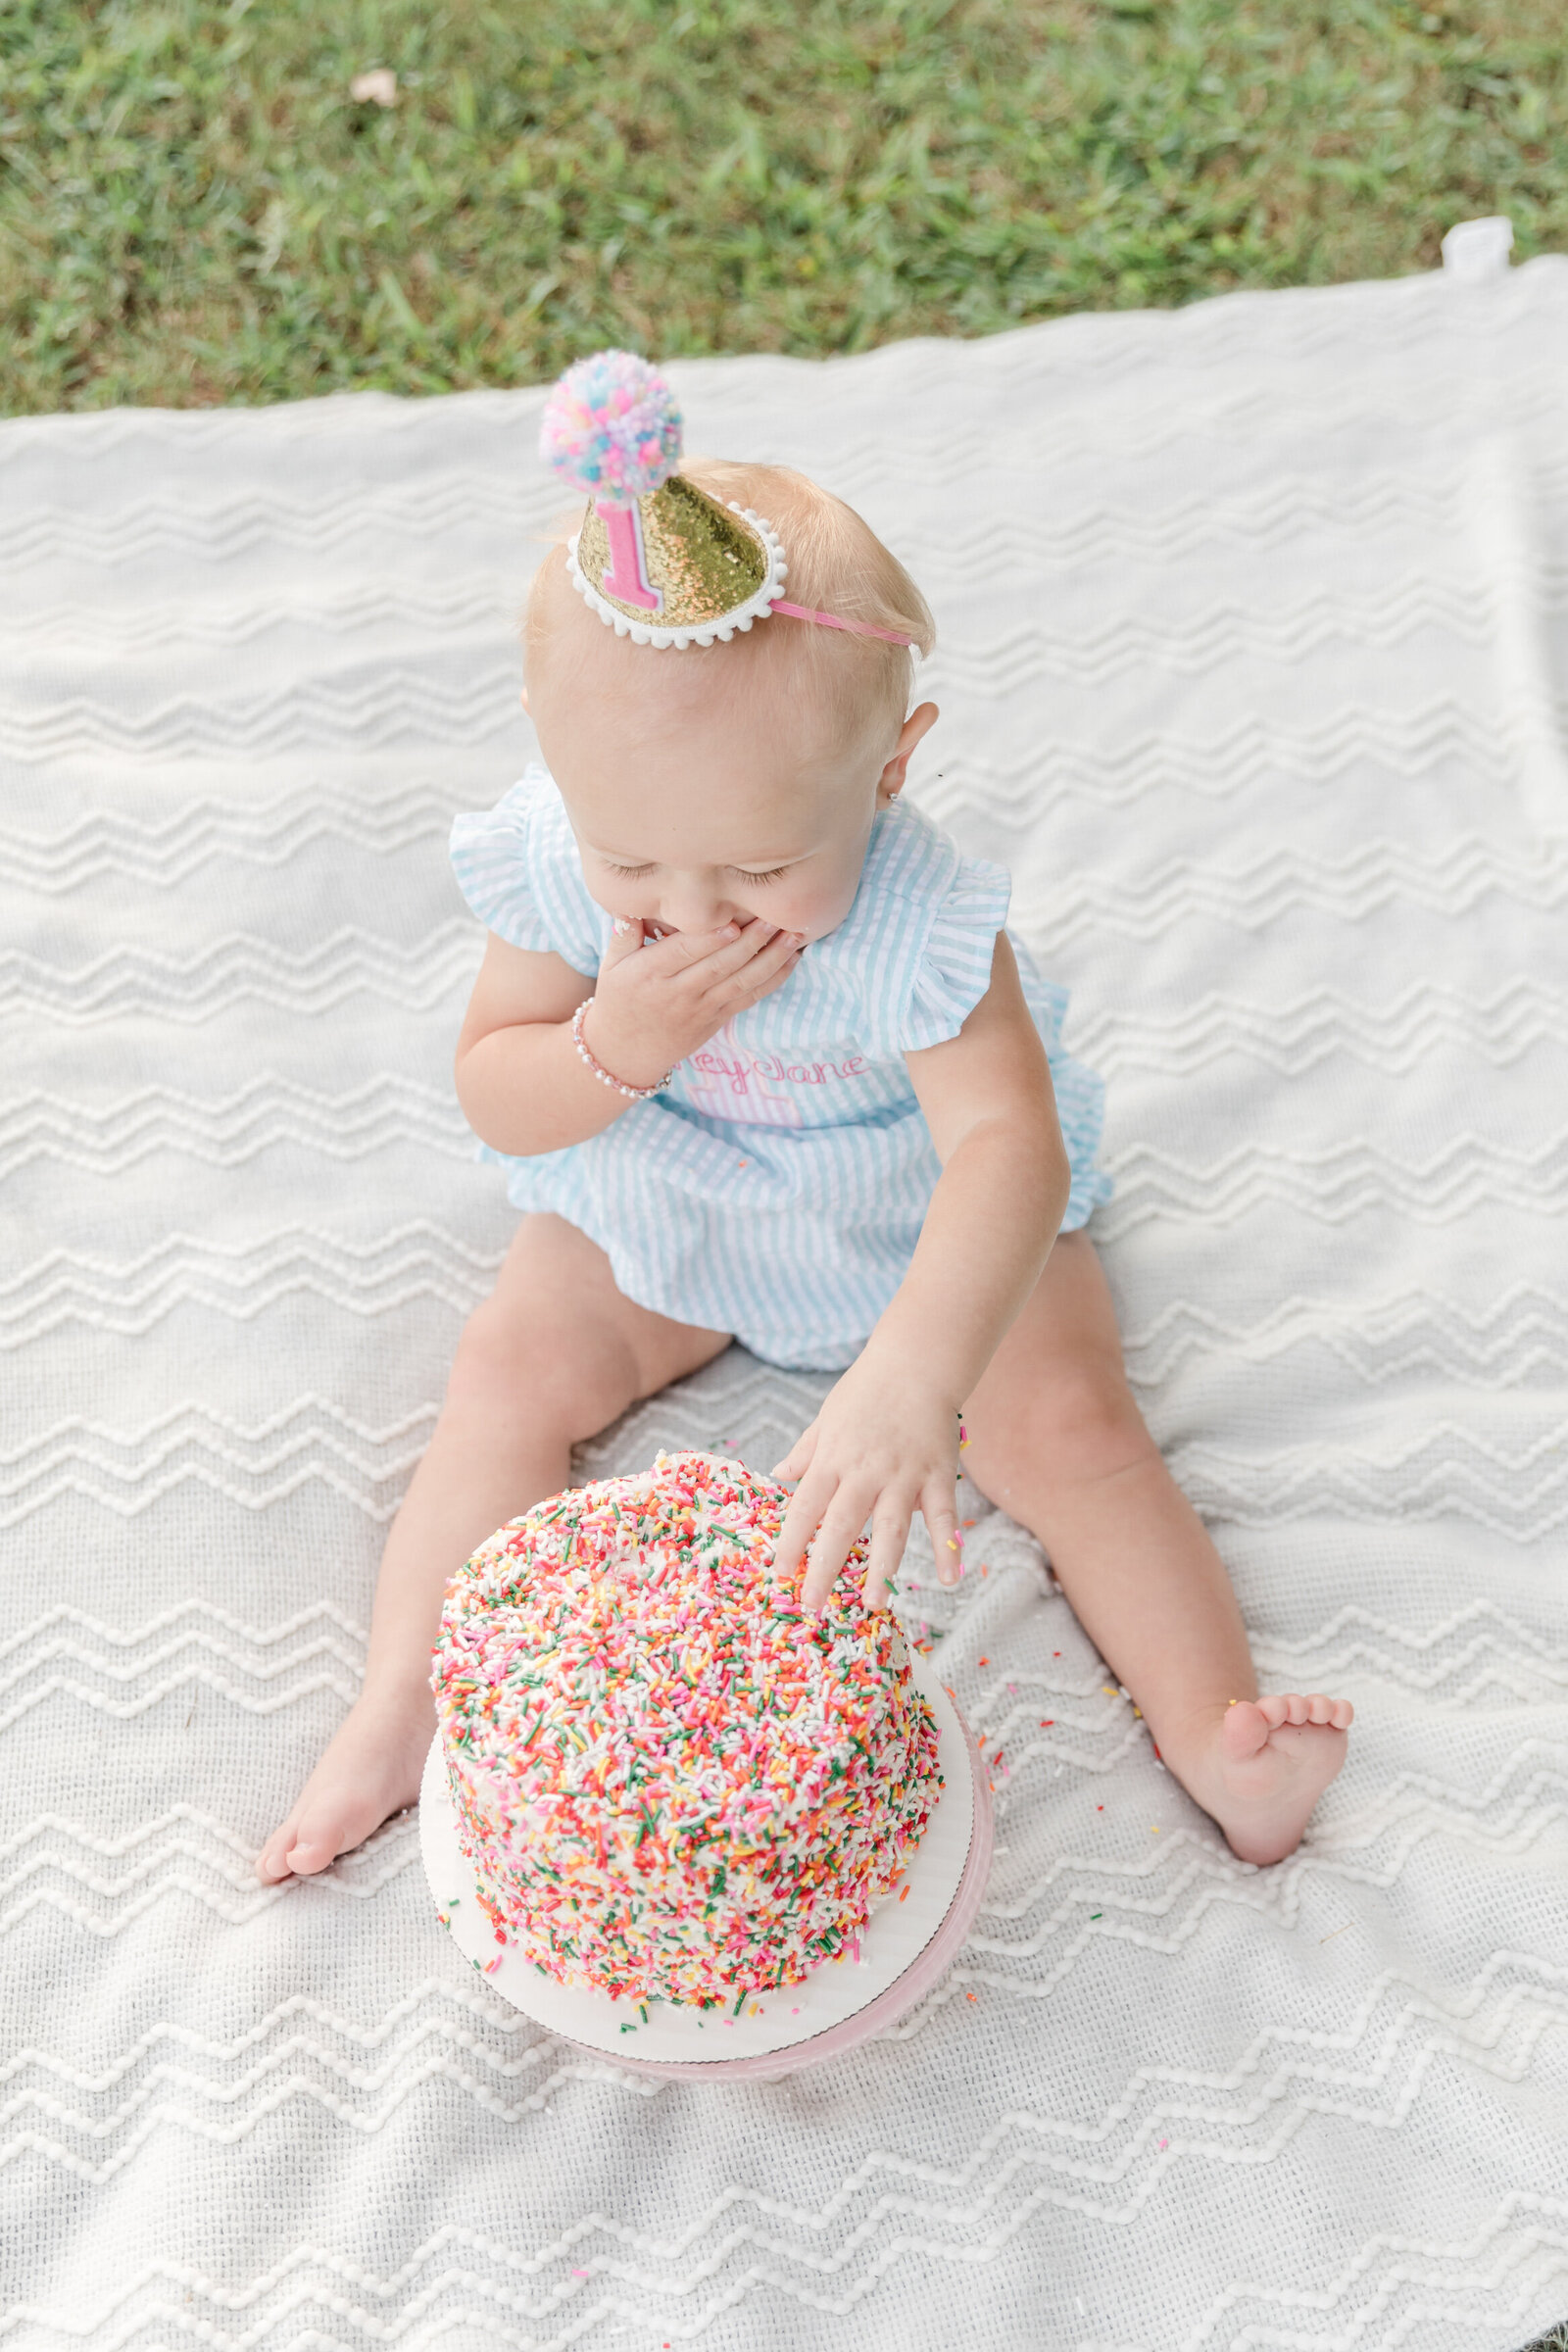 Baby digging into a sprinkled covered first birthday cake.